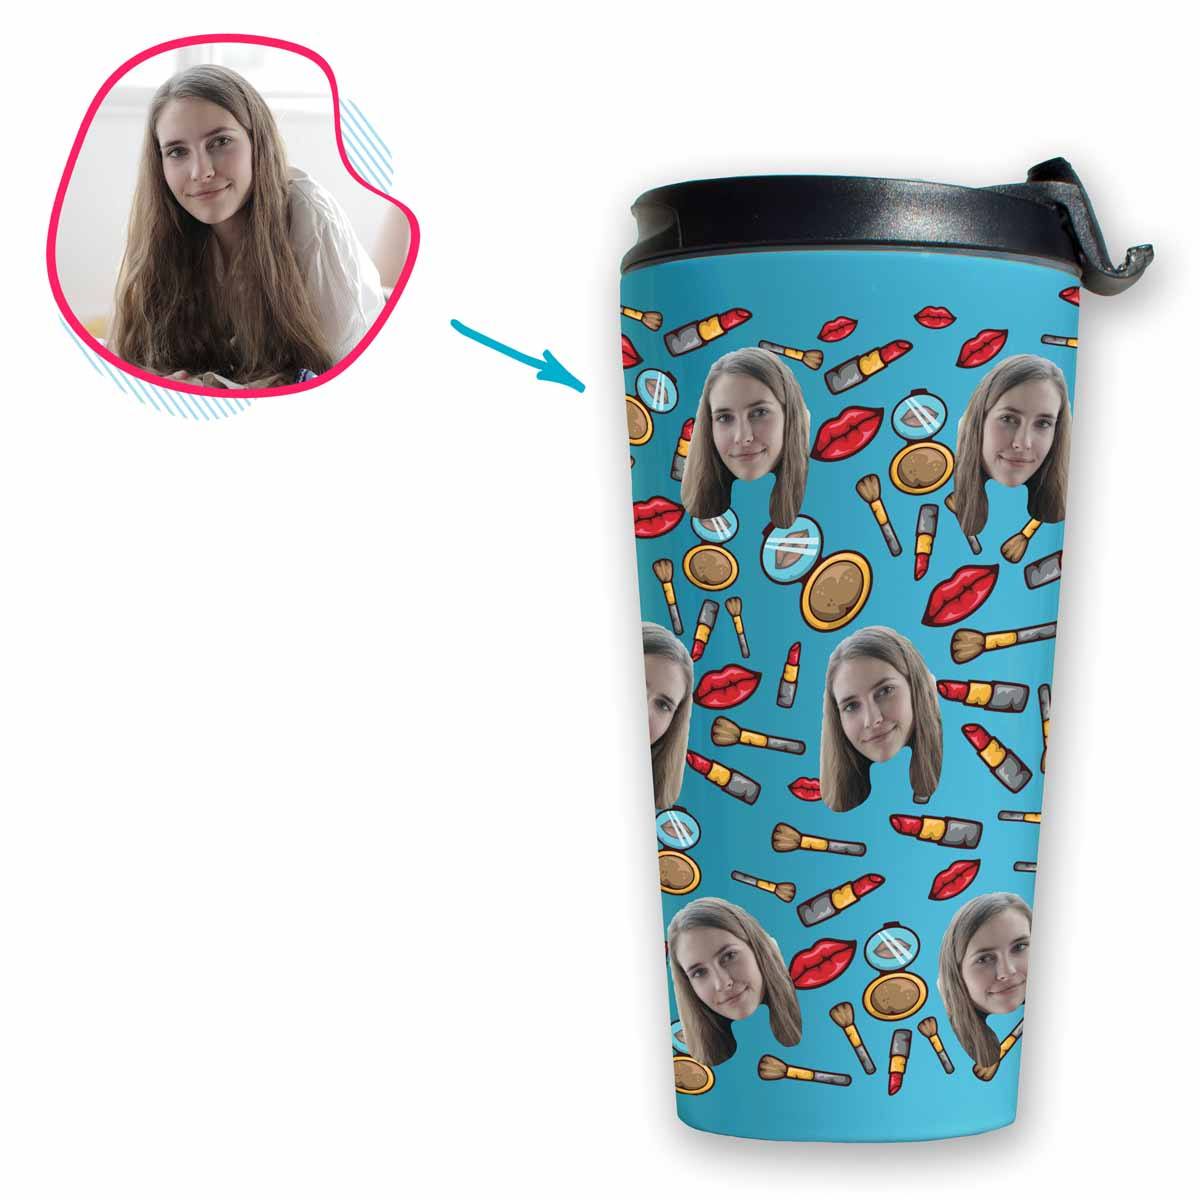 Blue Makeup personalized travel mug with photo of face printed on it